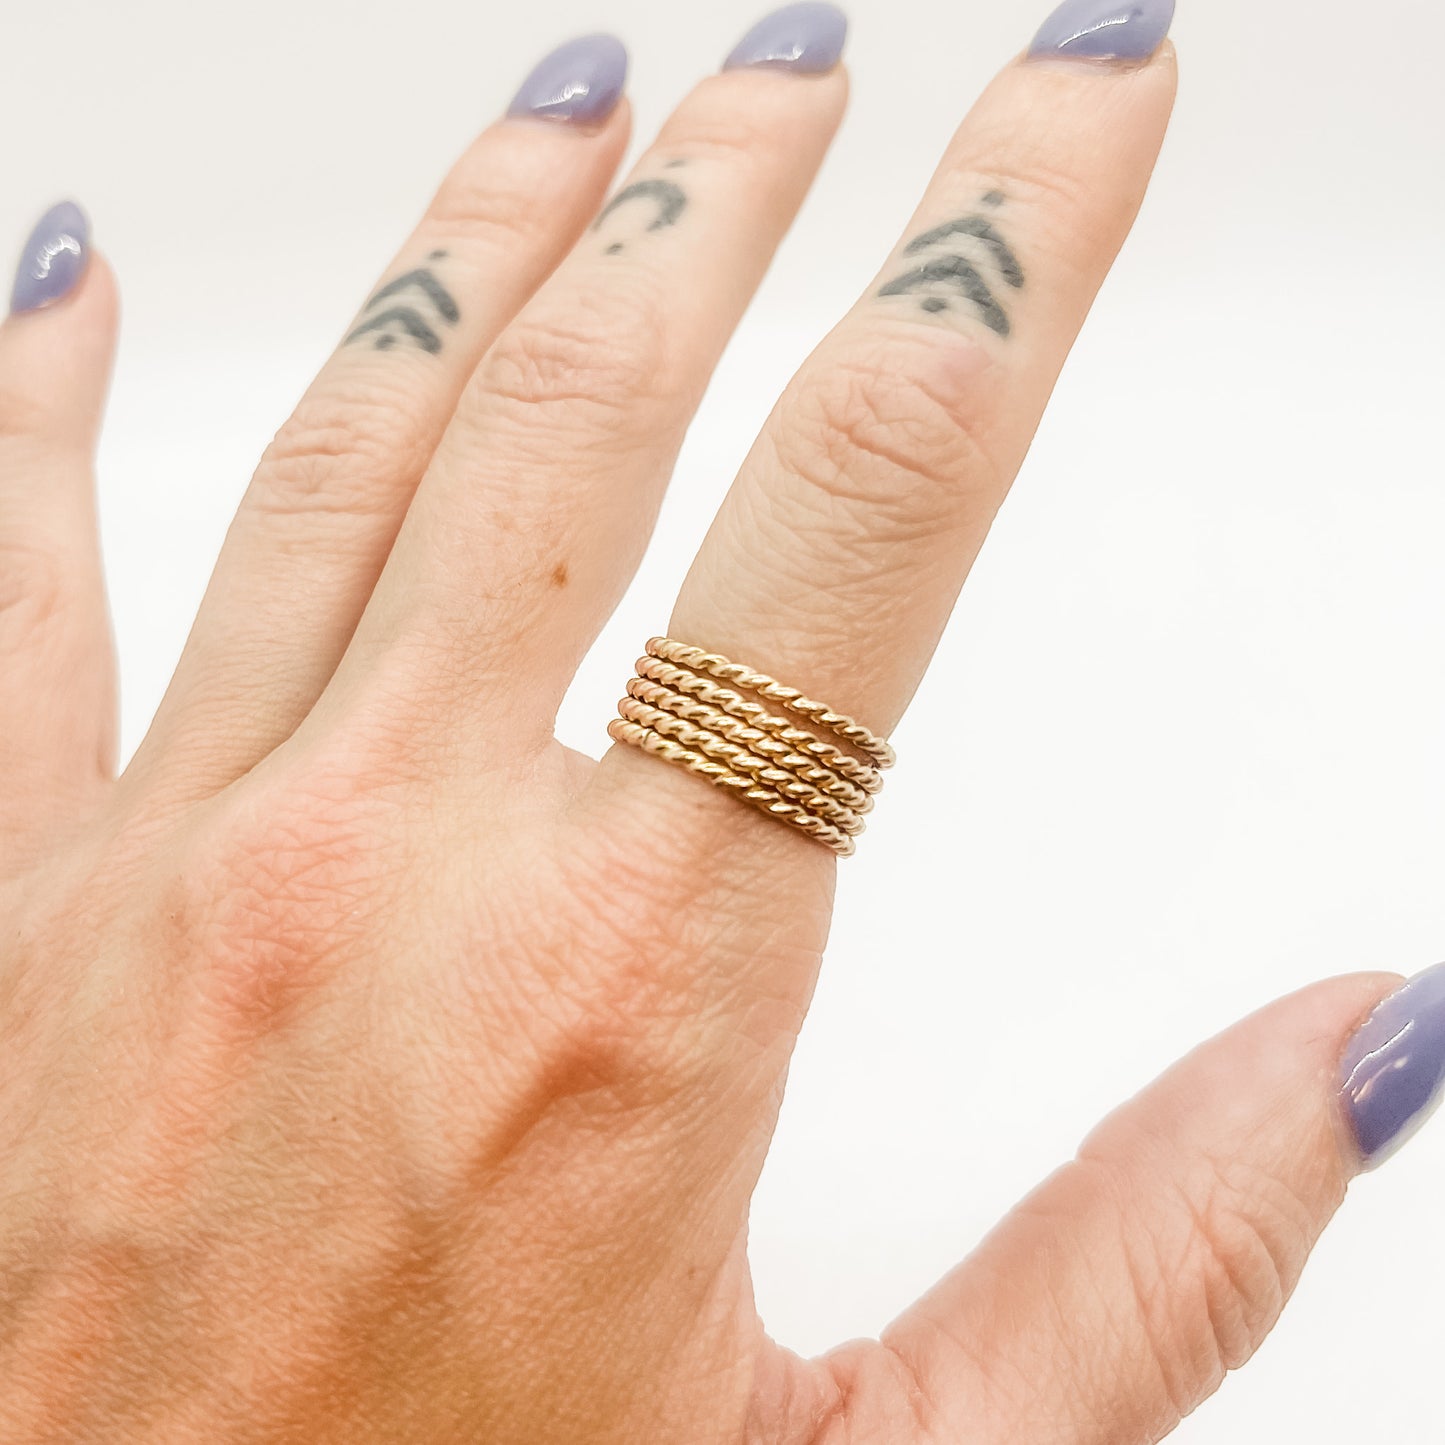 14K Gold Filled Stackers - Twisted Pattern (Set of 5)